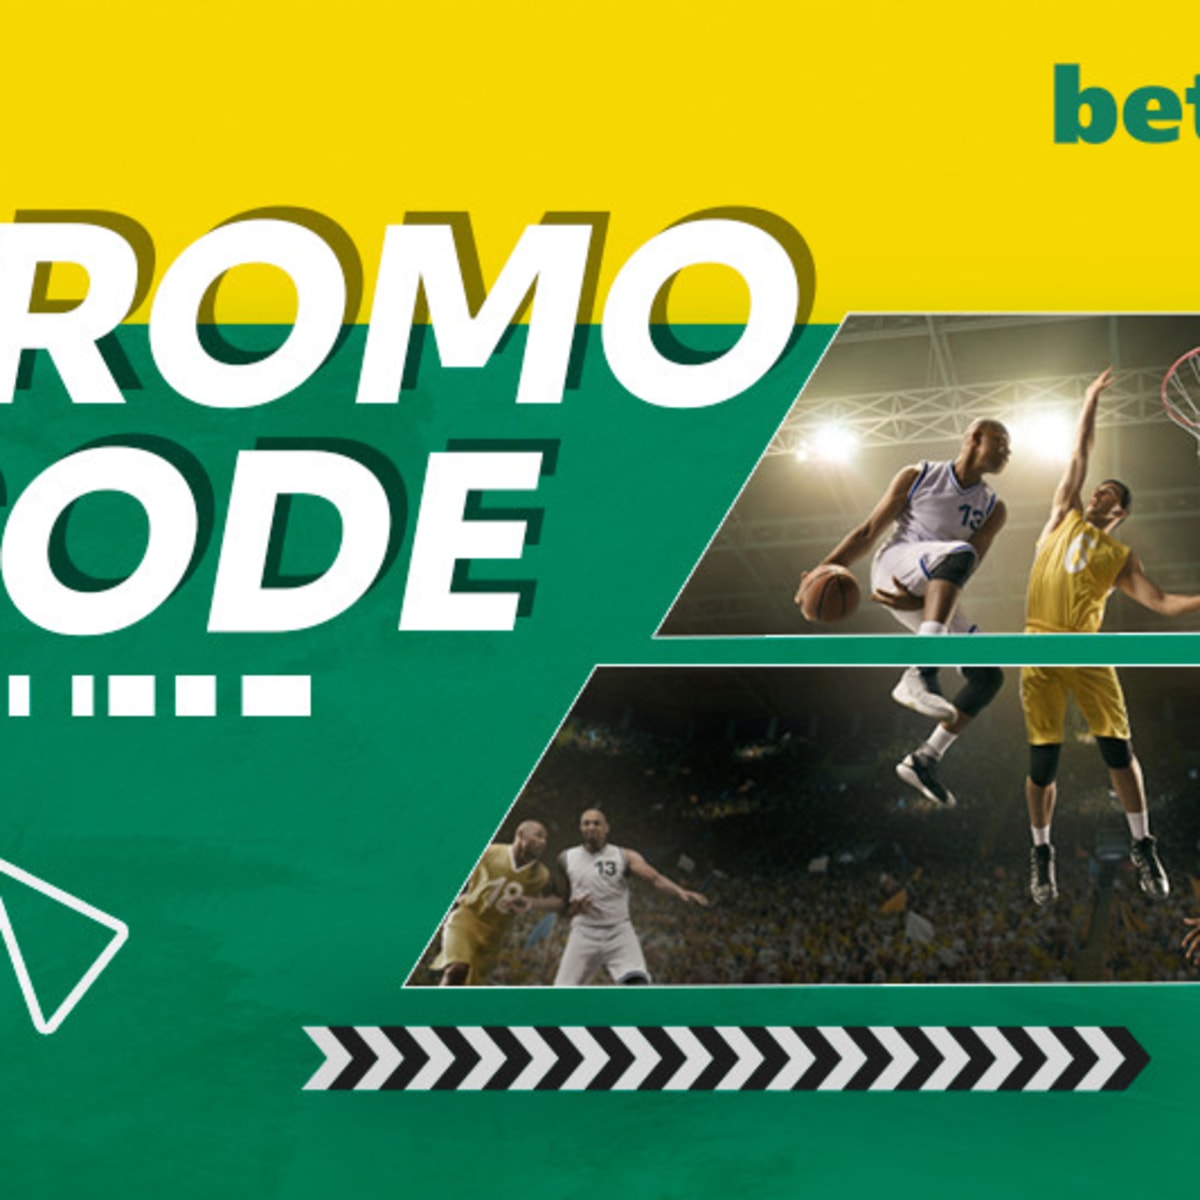 Bag £30 in bet365 Free Bets for New Customers in December 2023